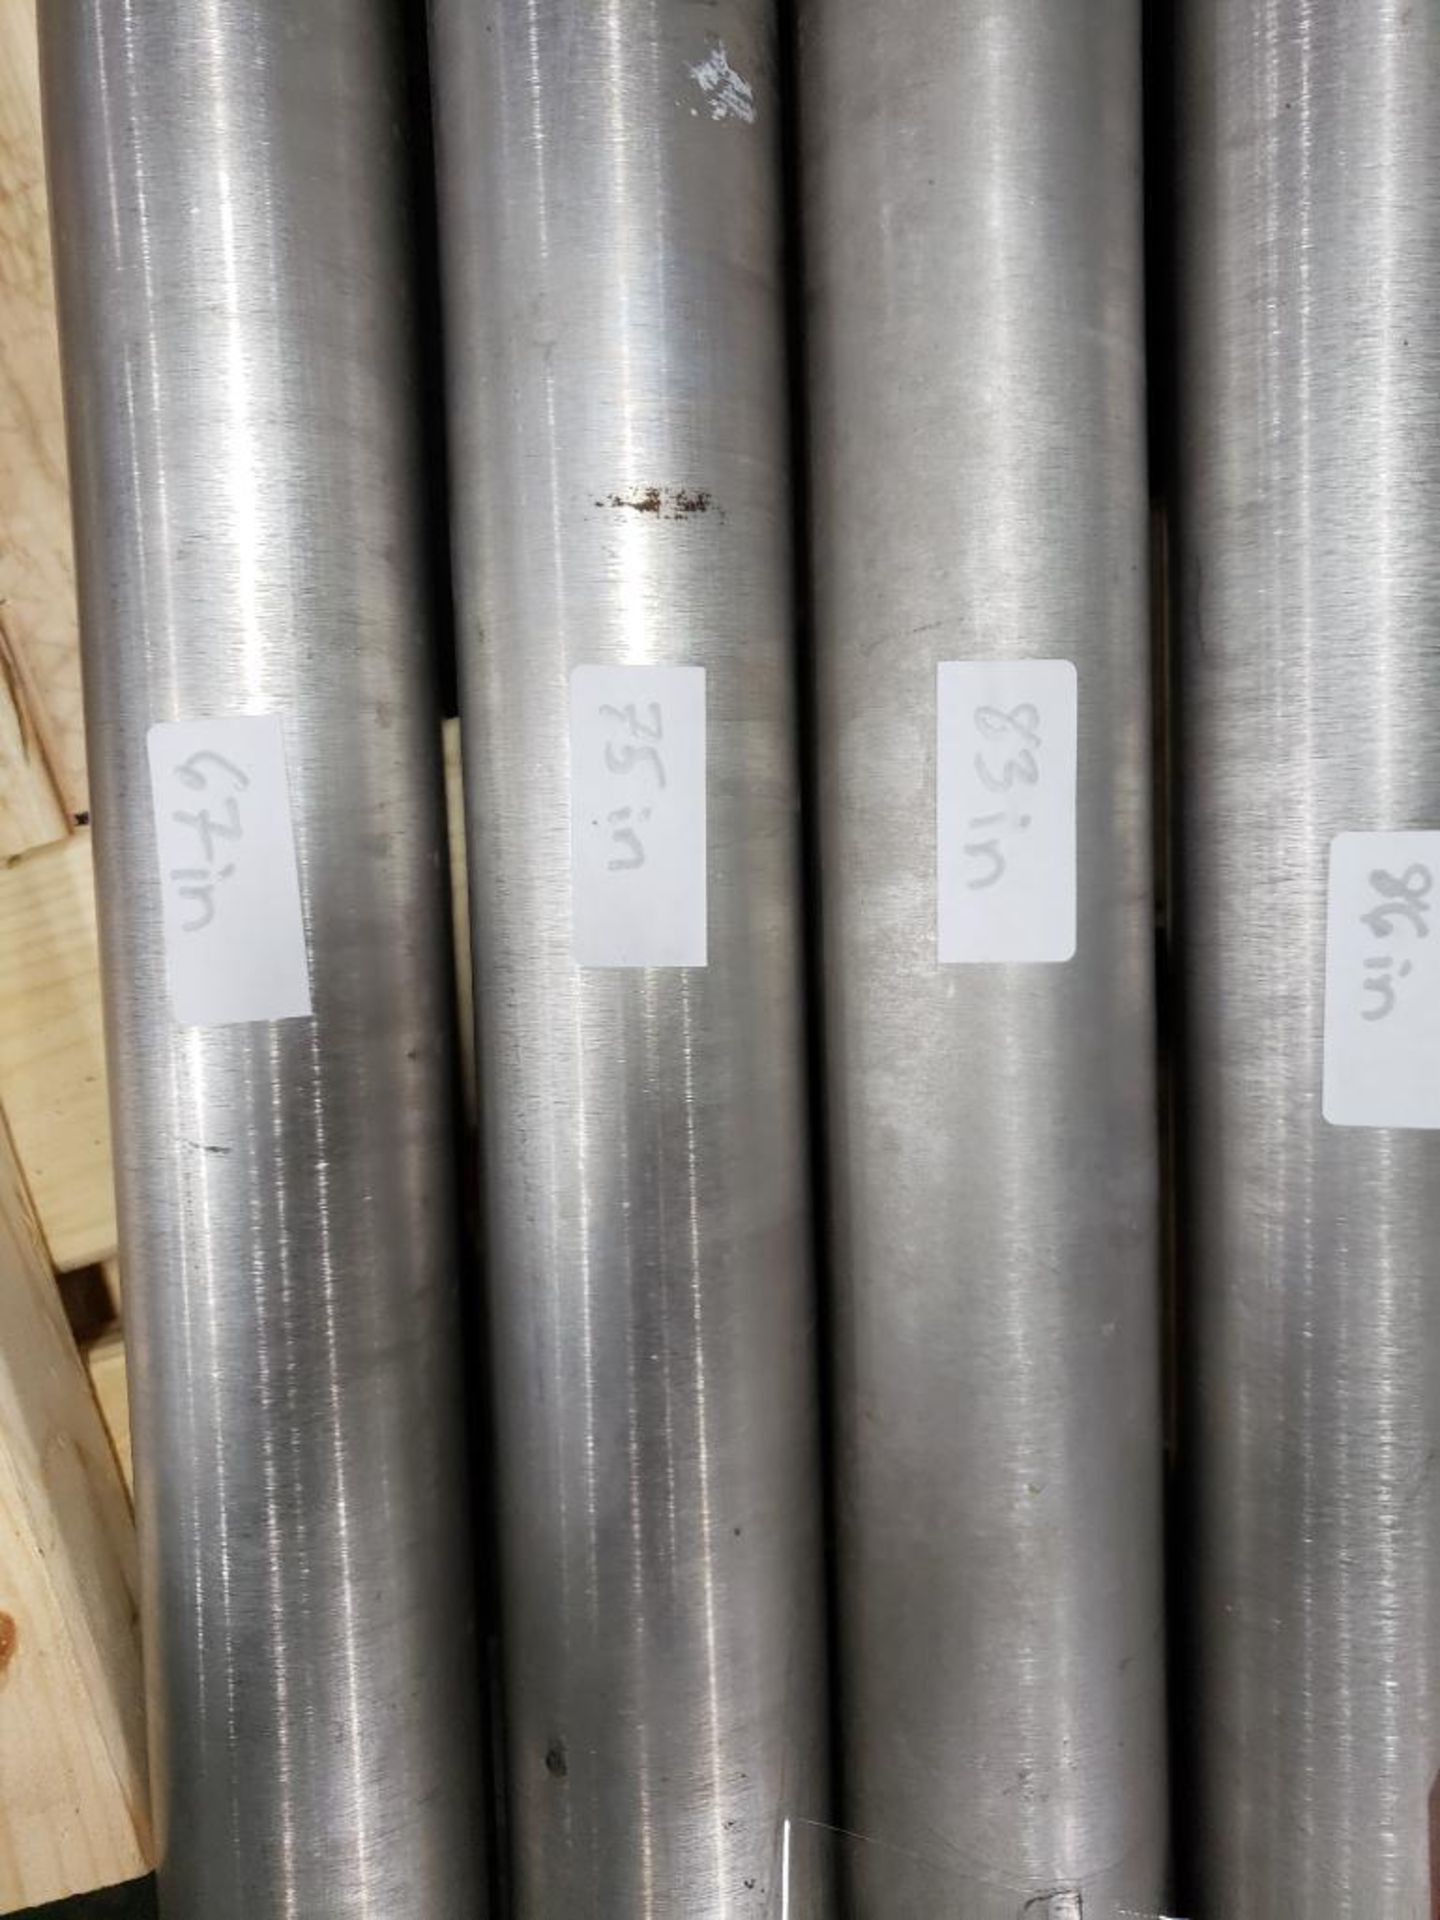 2.5 inch - Approx 37 total feet of 2.5in stainless food grade pipe in assorted lengths. - Image 4 of 7